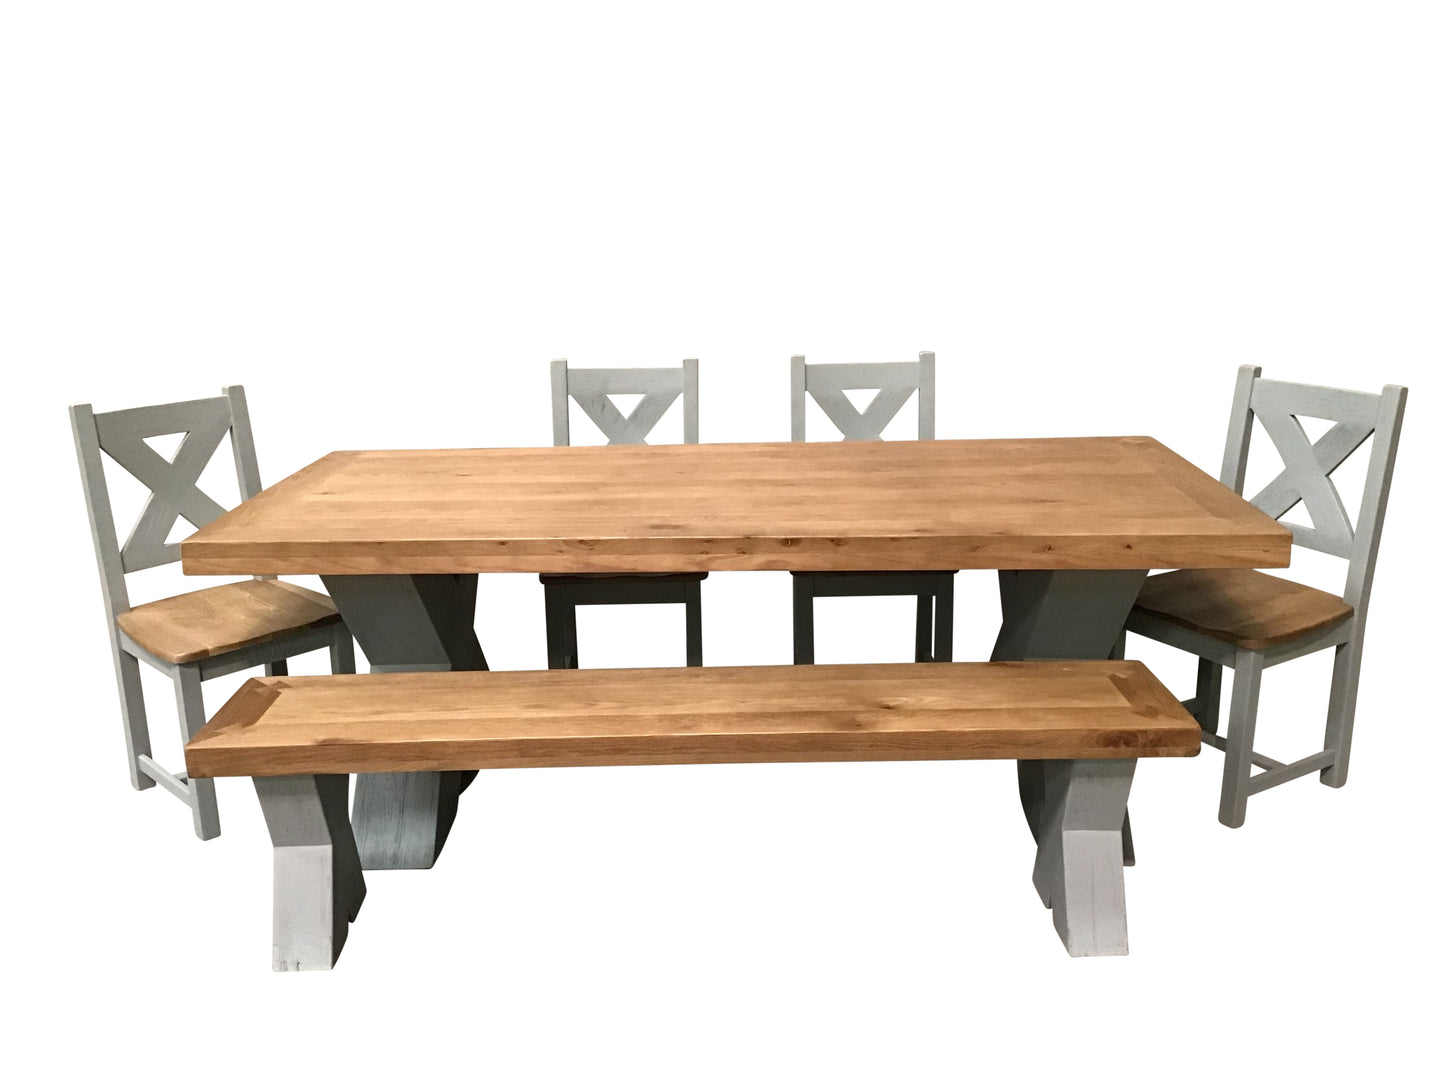 Maximus Oak 2.3m Dining Set painted French Grey with Maximus Dining Chairs